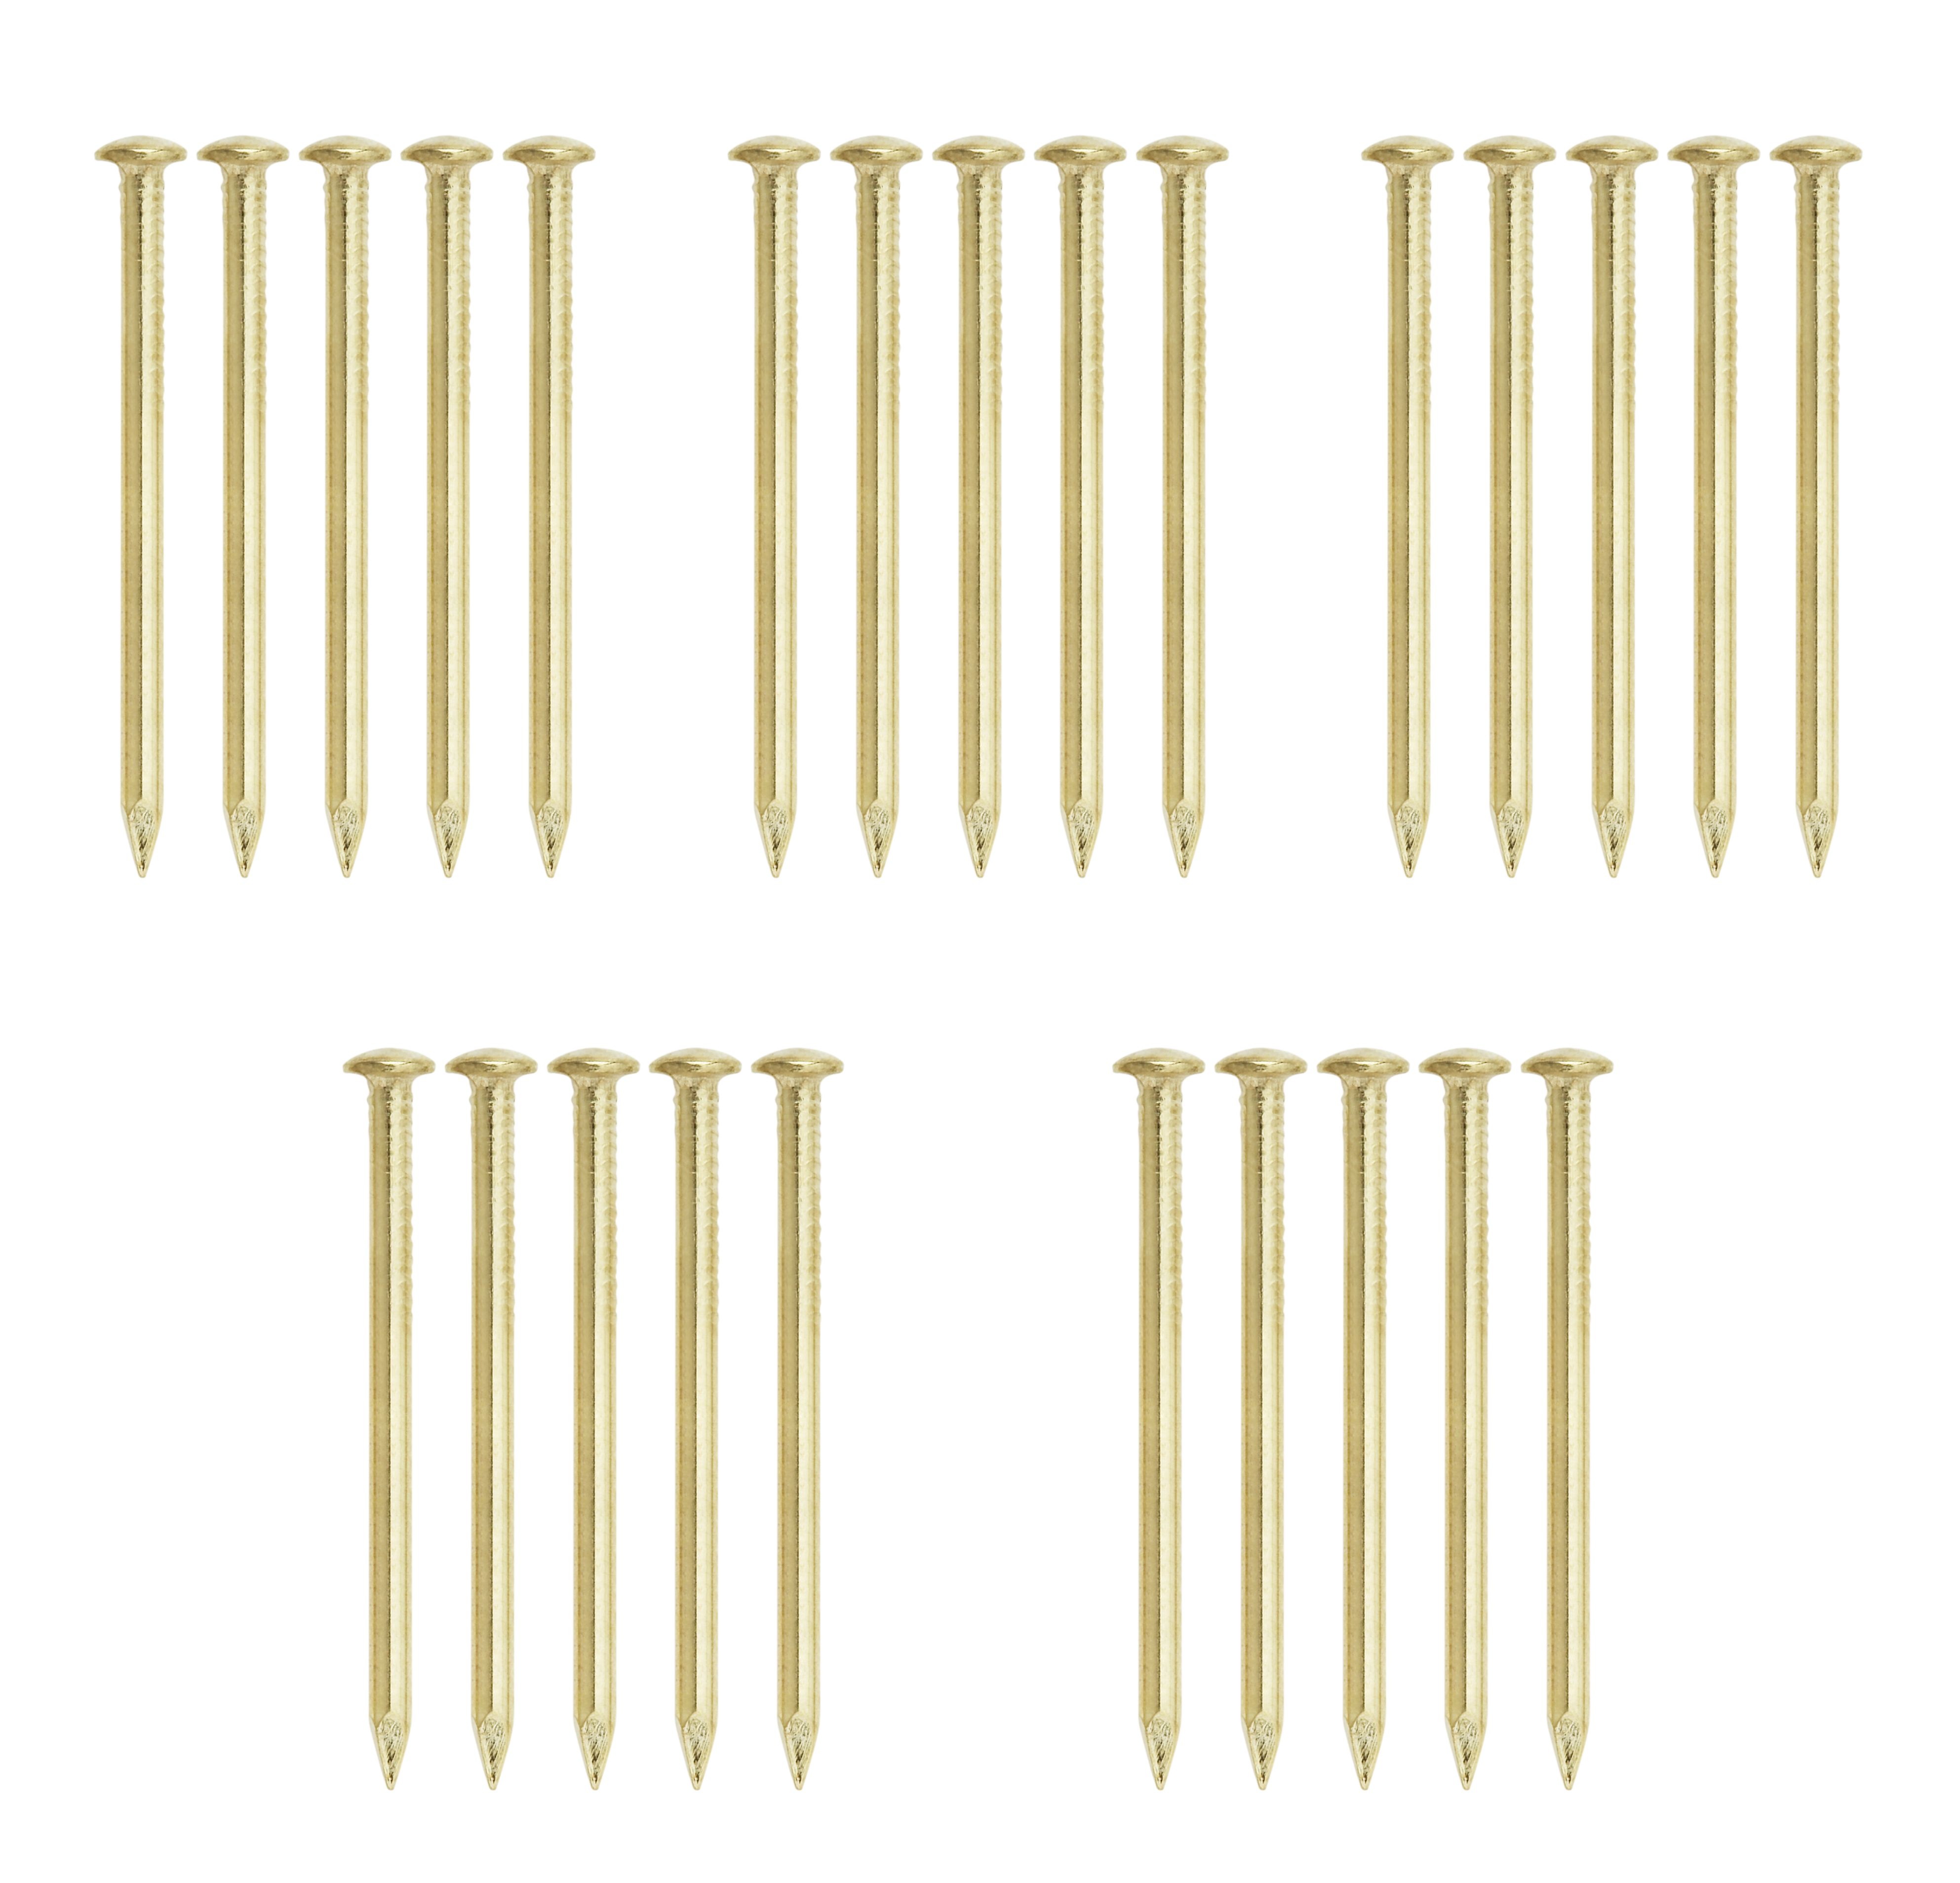 Picture pin (L)26.5mm (Dia)1.5mm, Pack of 25